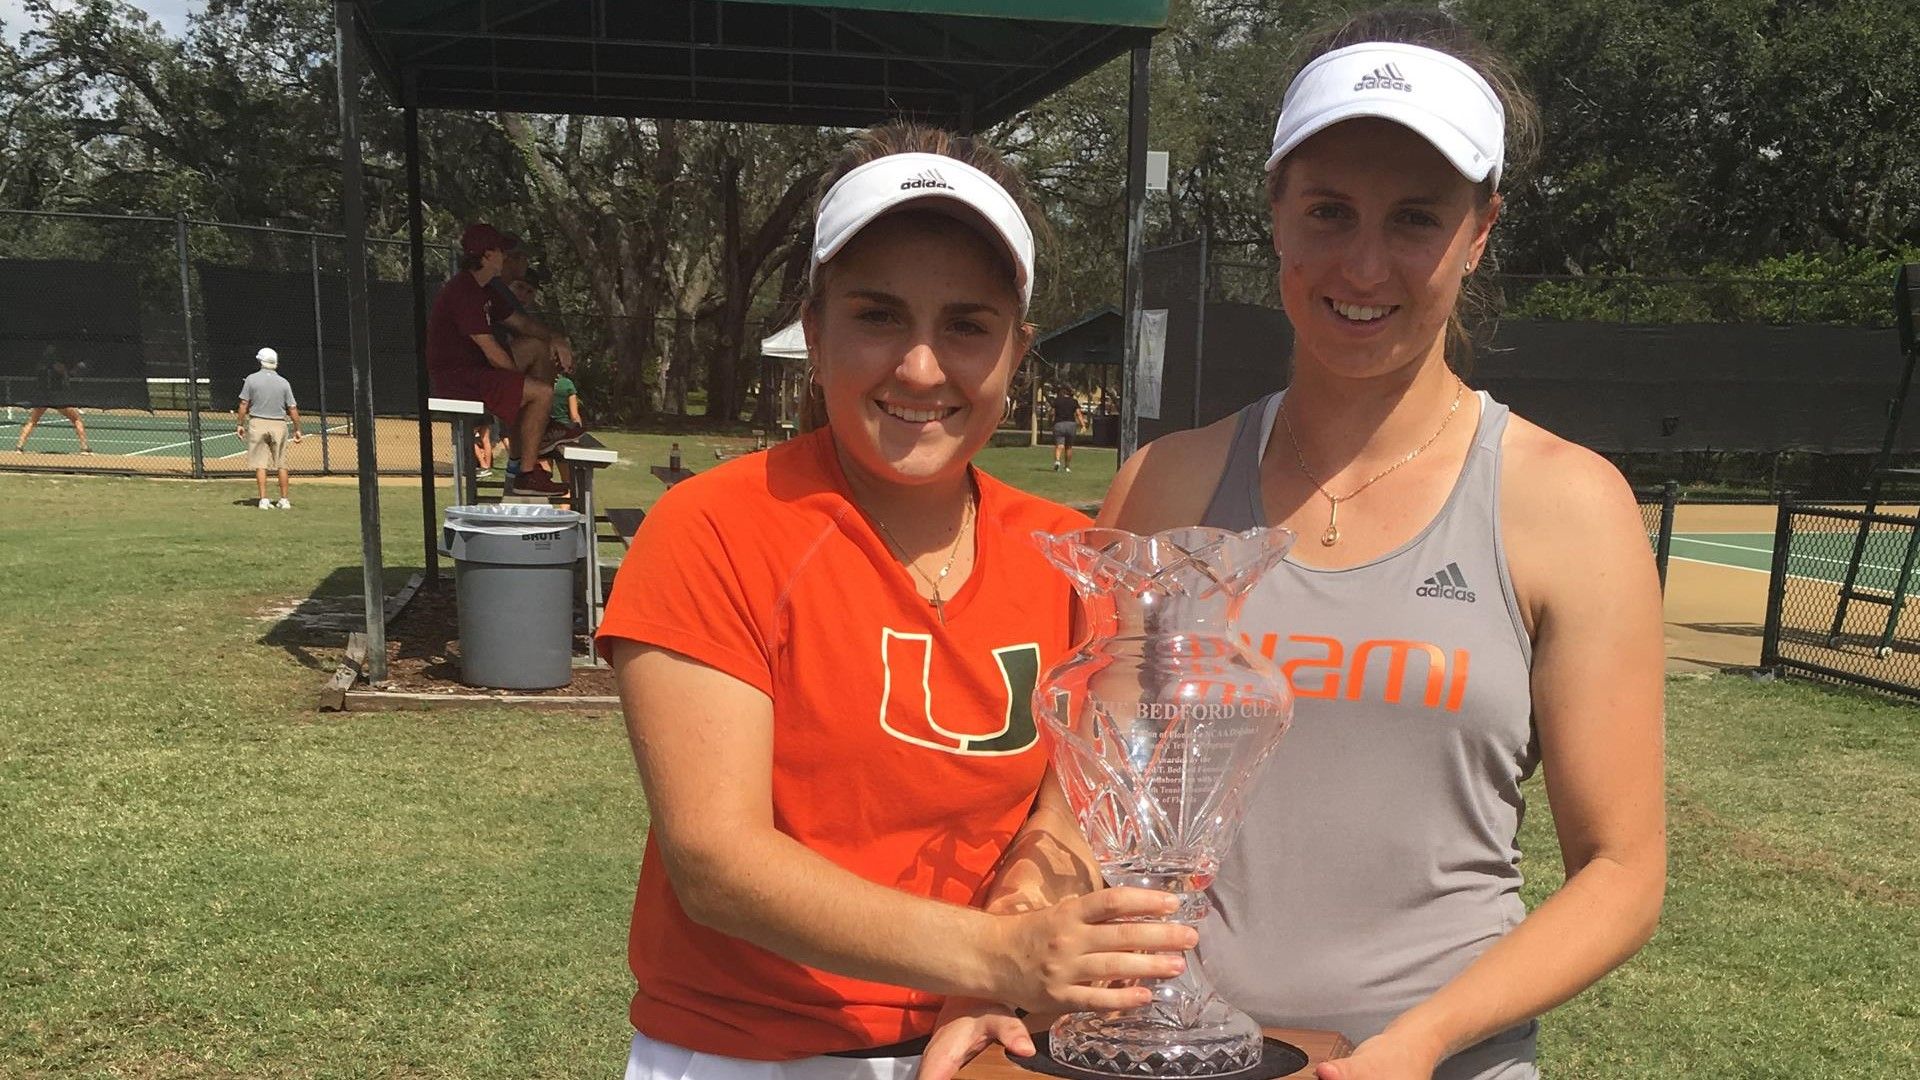 Miami Wins Two Titles at Bedford Cup